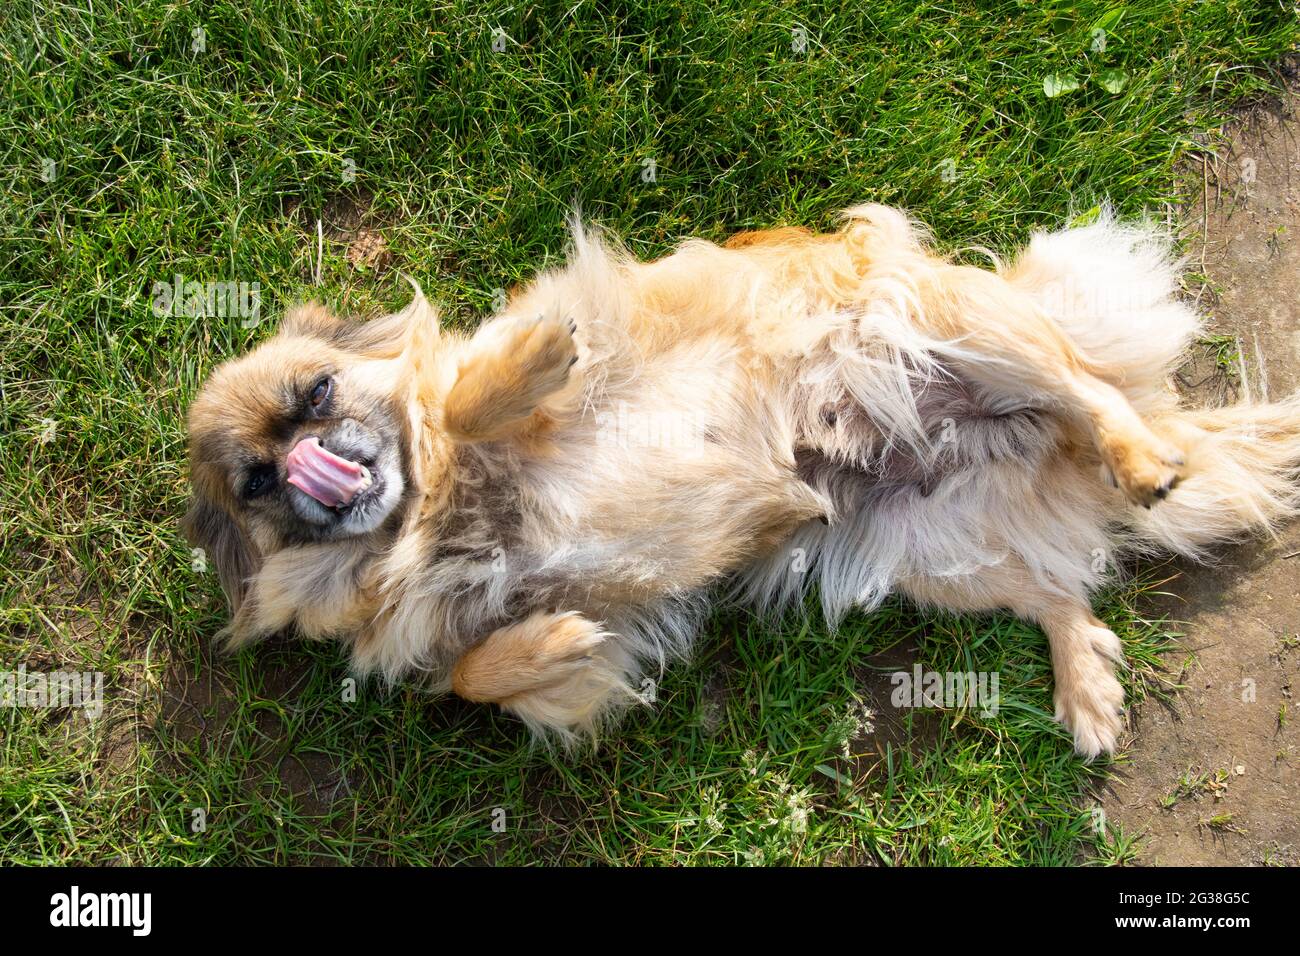 Red-haired Pekingese dog lies on its back on green grass close up Stock Photo